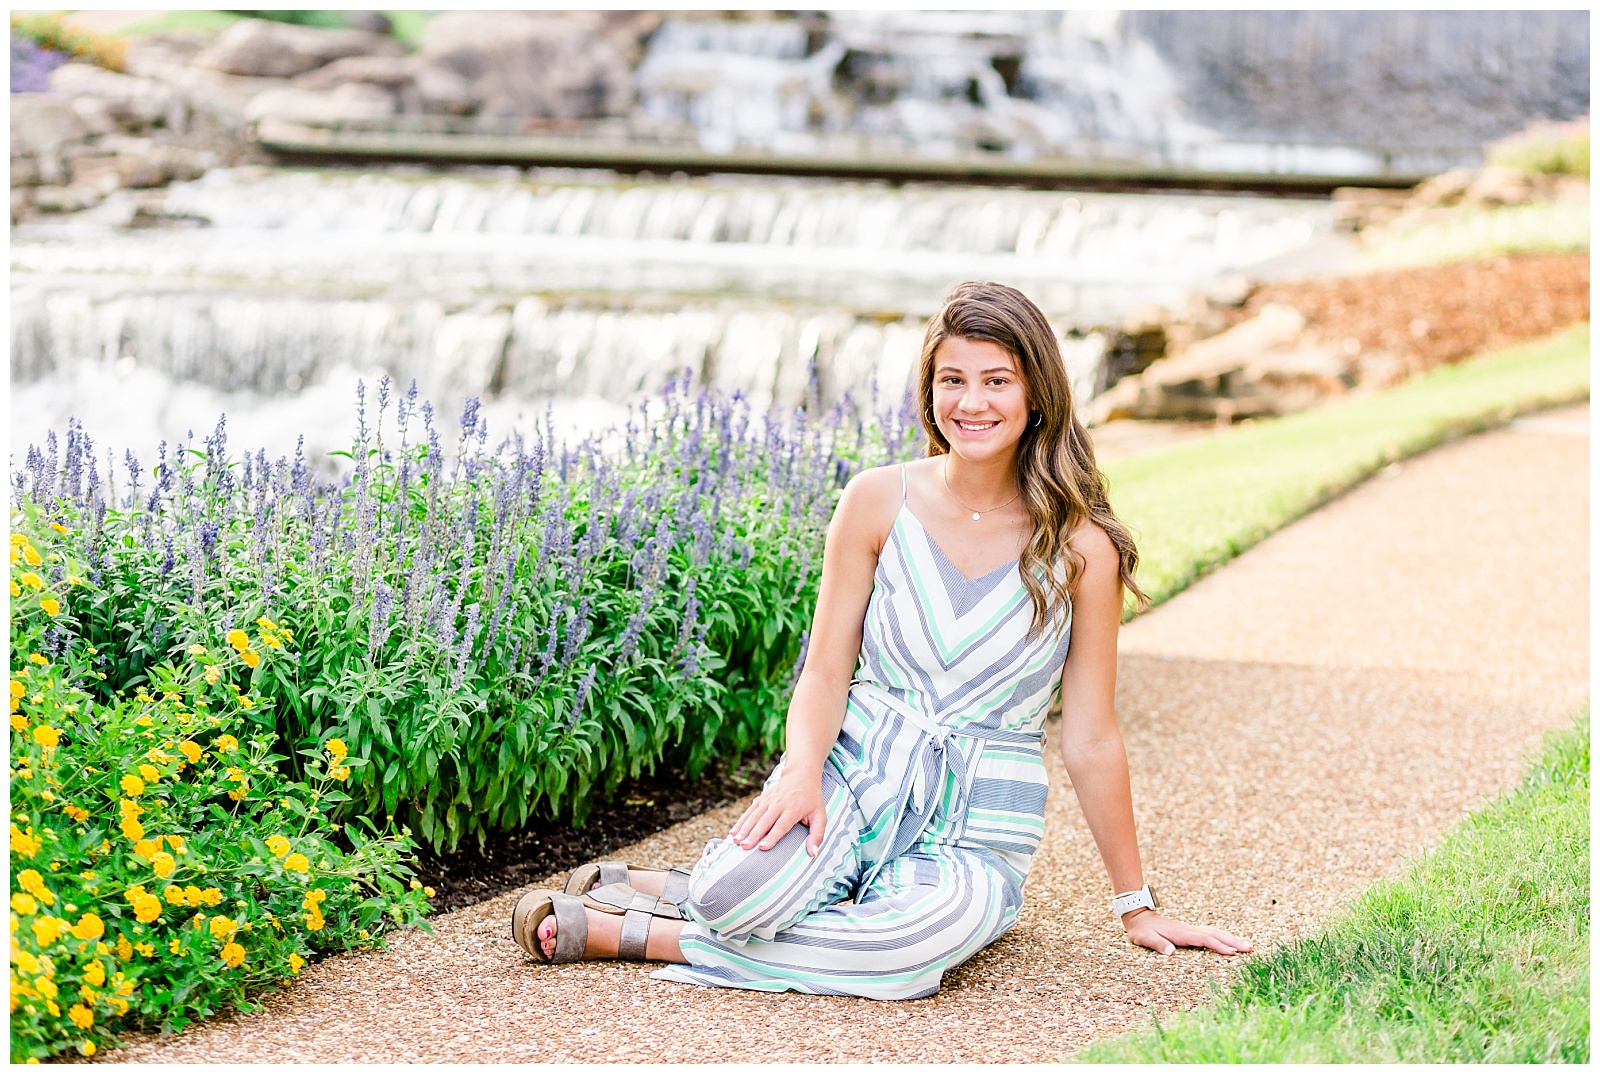 senior picture in striped jumpsuit by waterfall and flowers